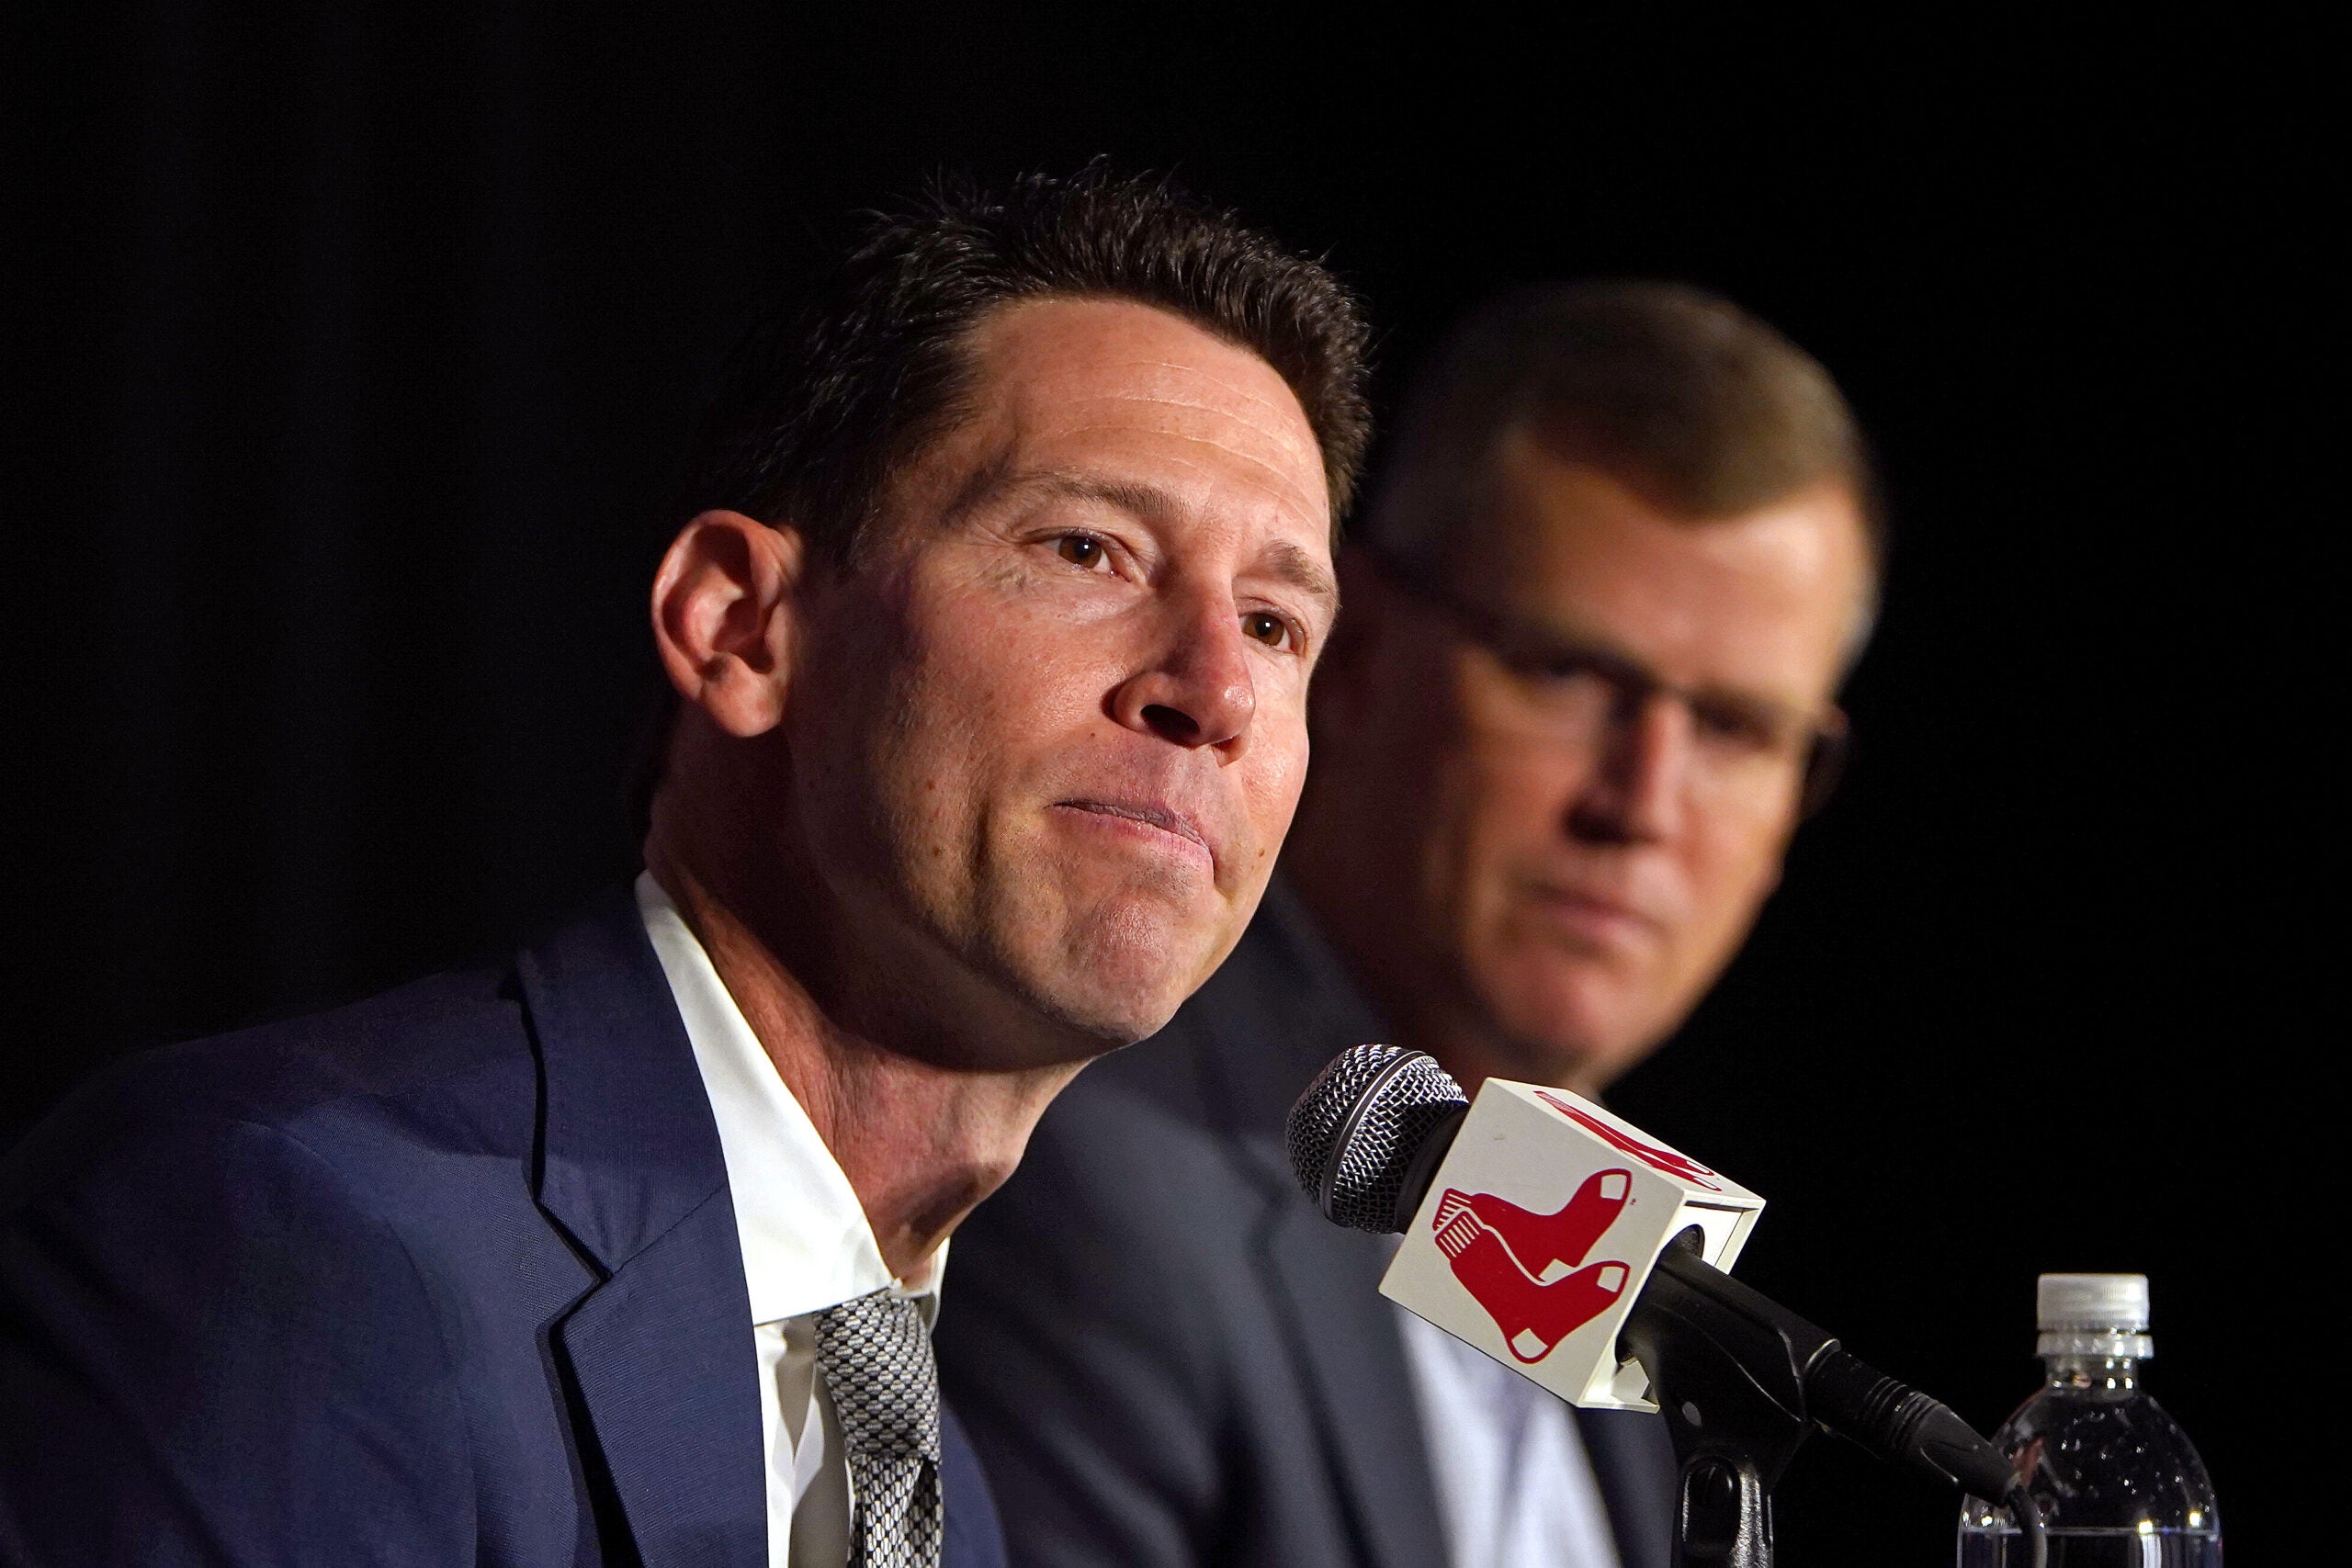 Craig Breslow and Sam Kennedy made up the entirely of the dais at Thursday's press conference at Fenway Park.